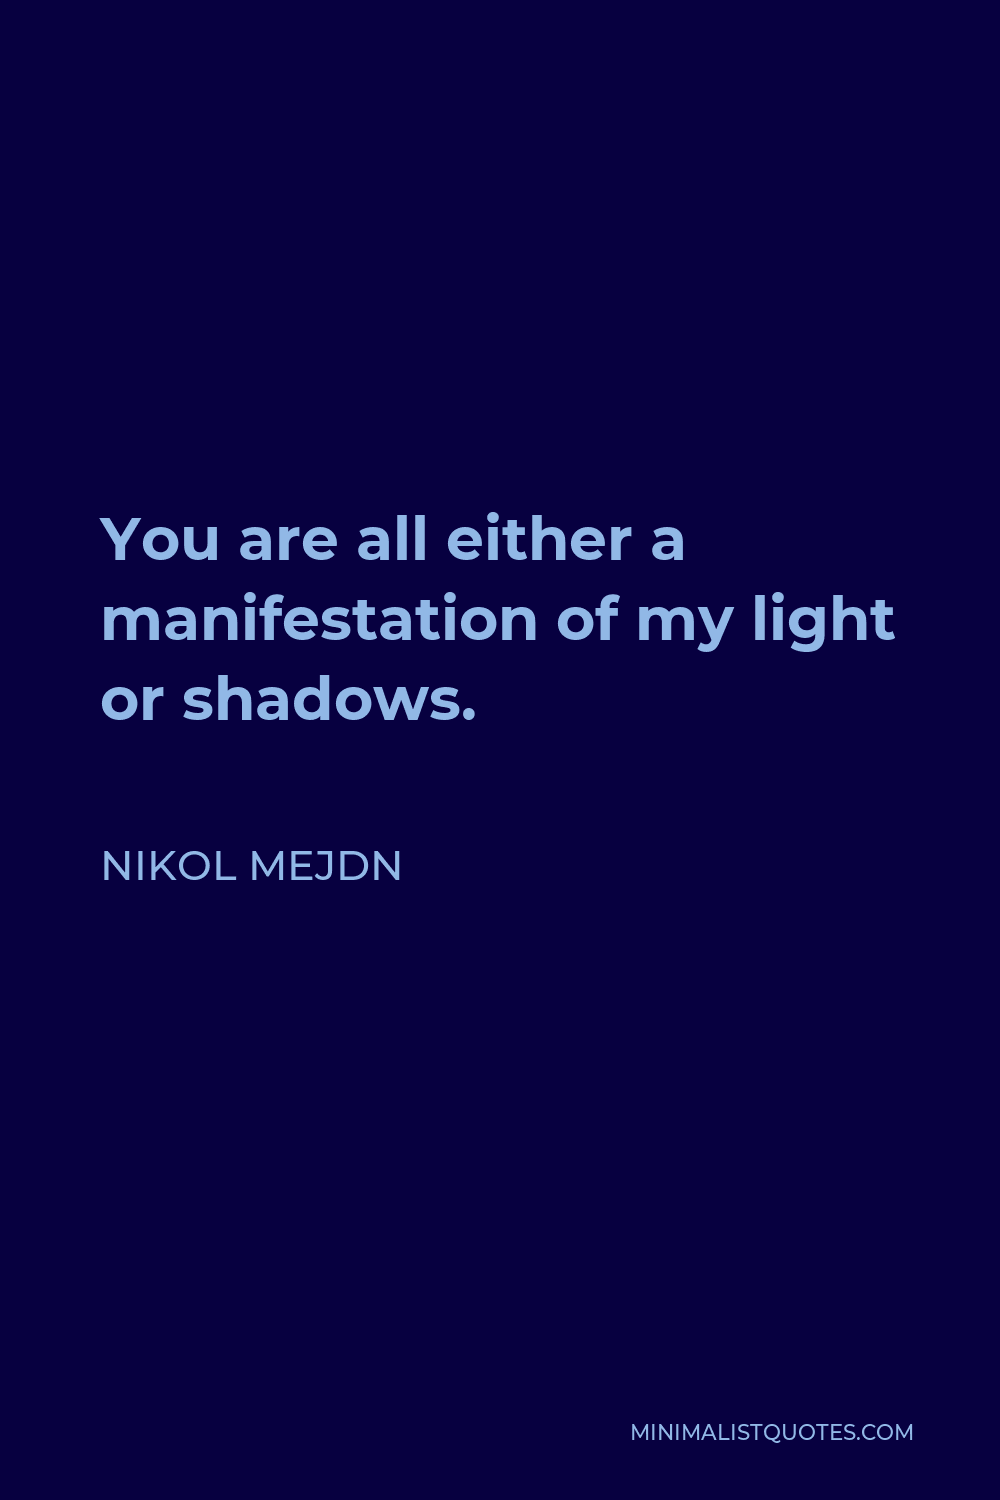 Nikol Mejdn Quote - You are all either a manifestation of my light or shadows.